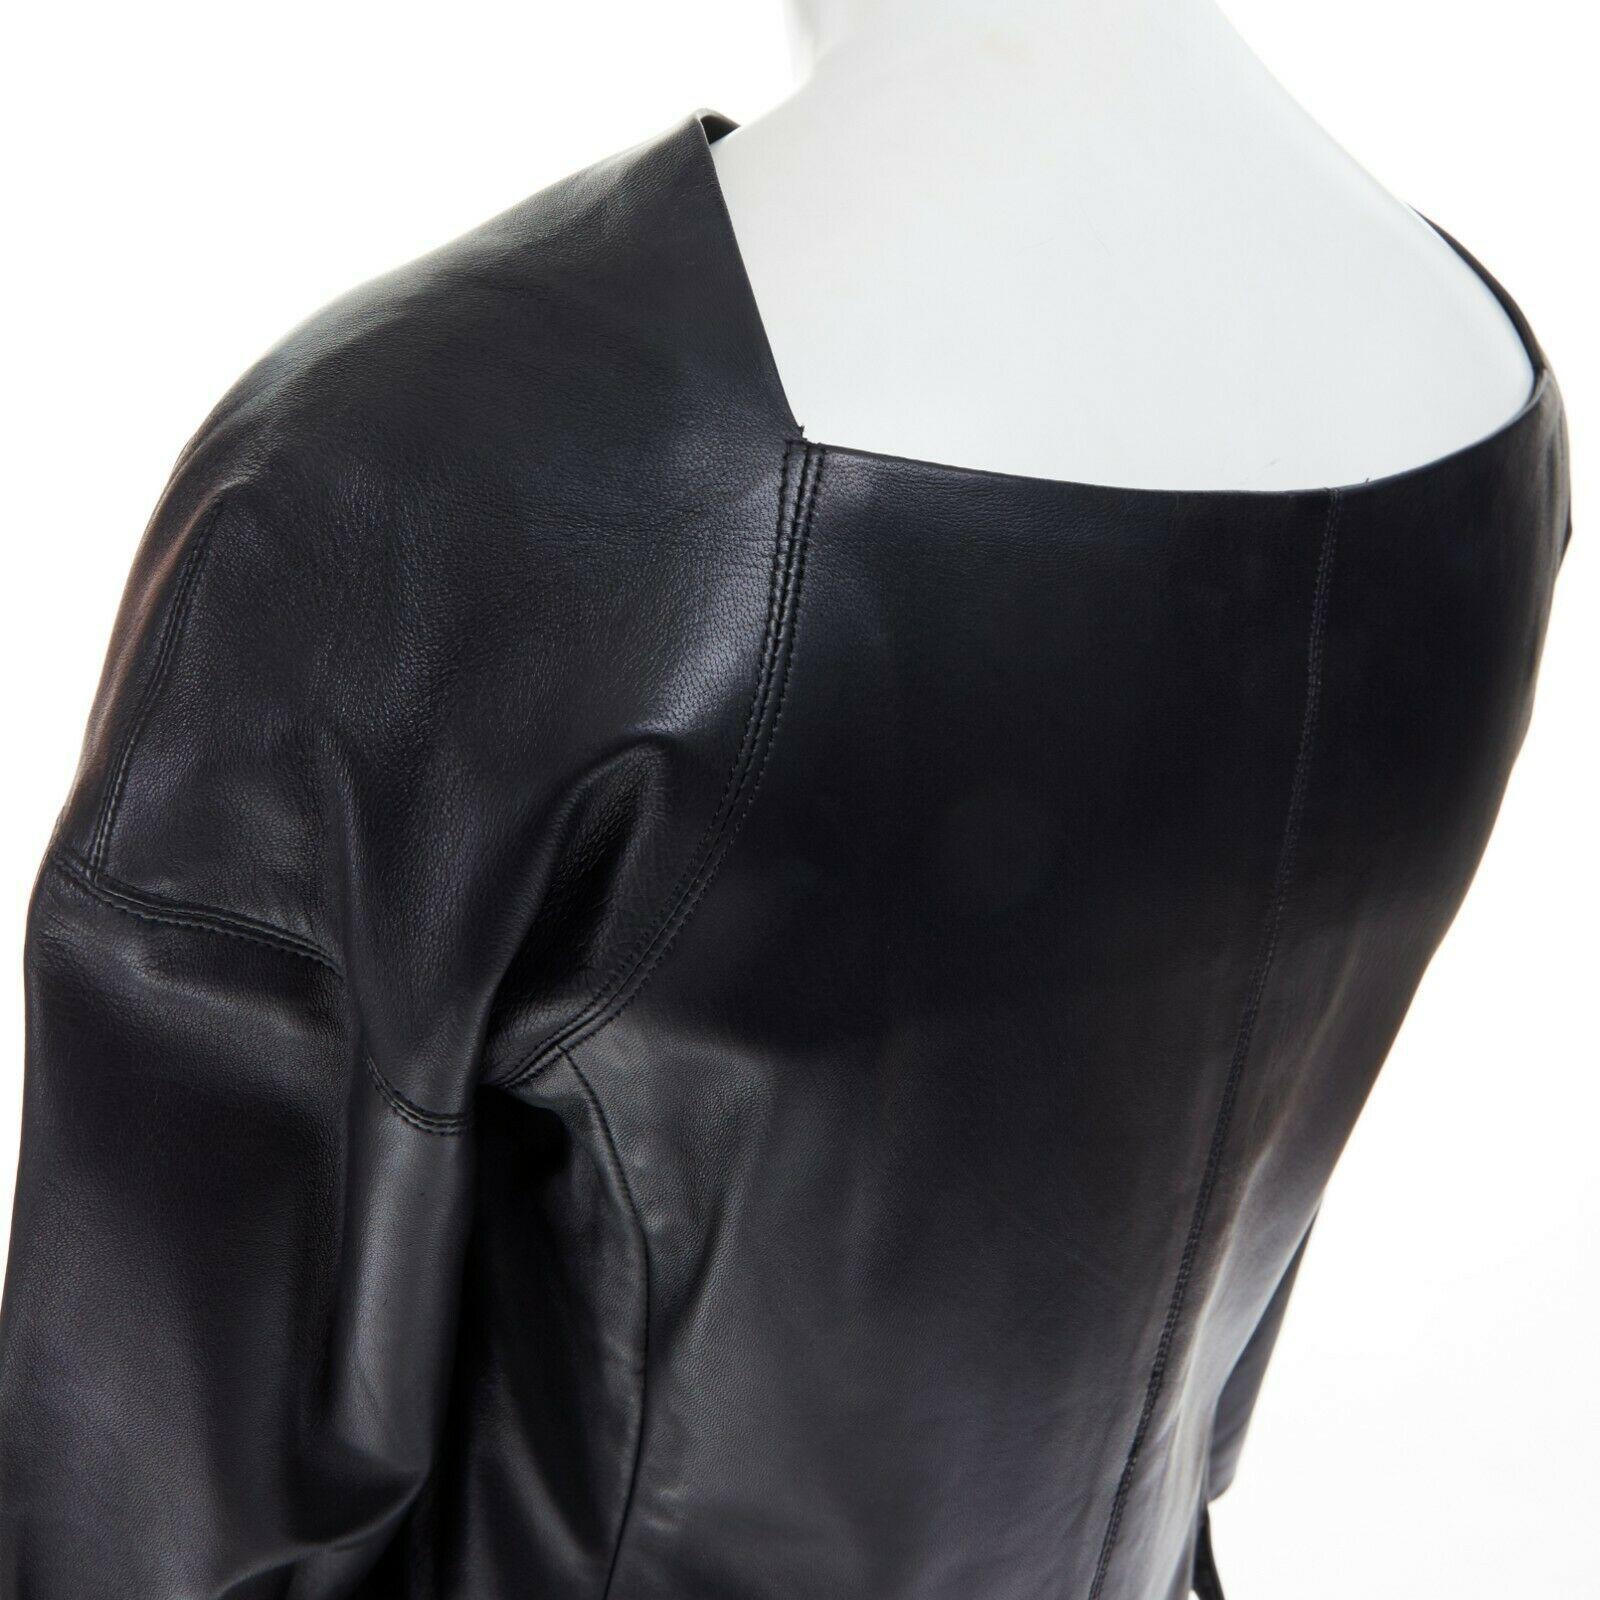 DONNA KARAN 100% lambskin leather wide angular neckline 3/4 sleeves top US4 S
DONNA KARAN
100% lambskin leather. 
Black. 
Wide. 
Angular cut at back of neck. 
Dropped shoulder seam. 
3/4 sleevses. 
Off center concealed zip closure. 
Fully lined.